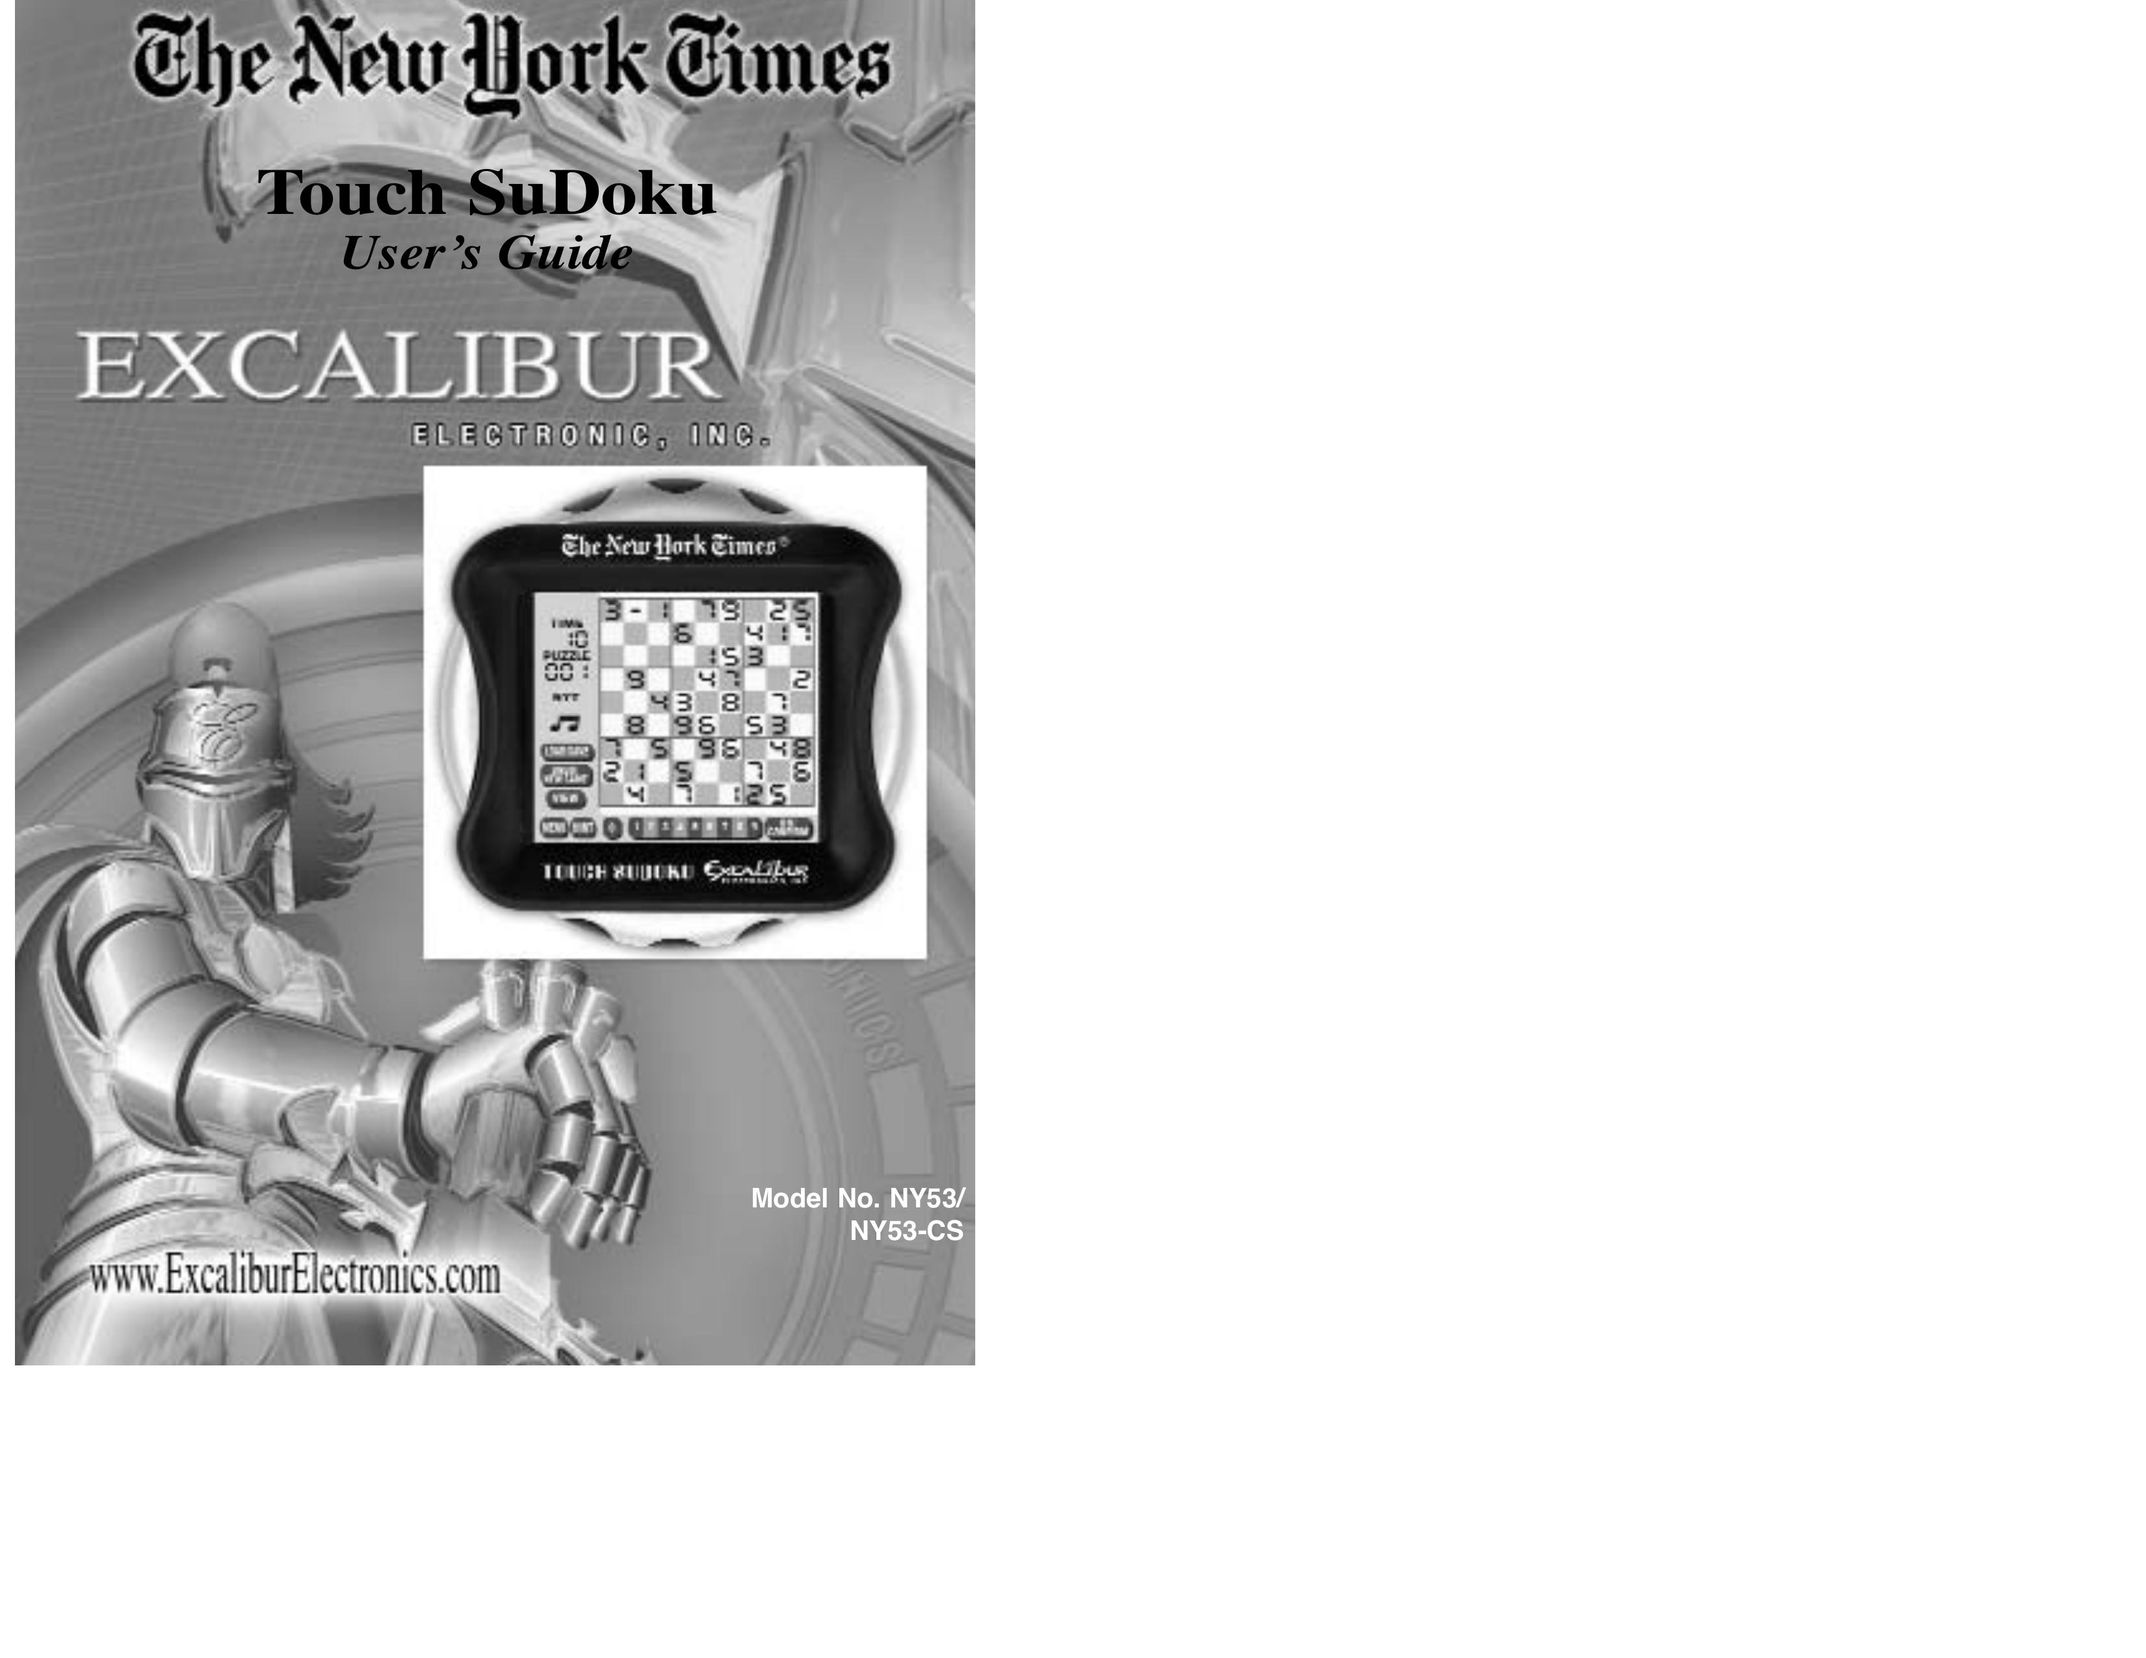 Excalibur electronic NY53 Games User Manual